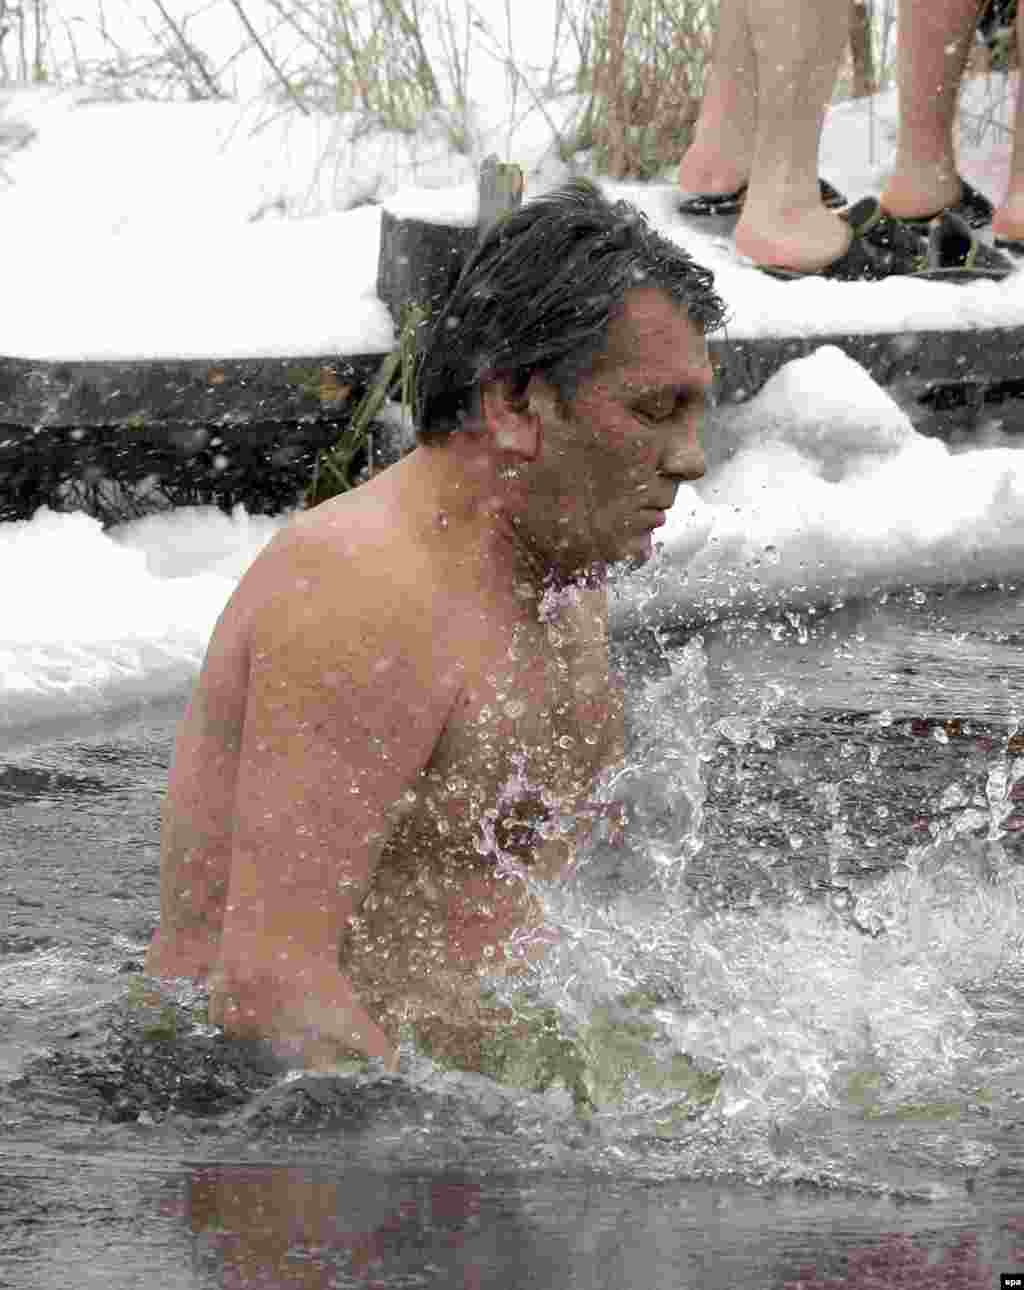 Ukrainian President Viktor Yushchenko takes a dip in the ice-cold waters of the Dnieper River in January (epa) - Oil and gas are forms of 'soft power,' but it felt hard and harsh to Ukrainians when, in the middle of winter, Russia turned the gas taps off. Georgians too found themselves freezing, and few there believed the January explosions that cut the pipeline from Russia were accidental. The suspicions persisted and across Europe politicians voiced fears that Russia is using its energy power too energetically.